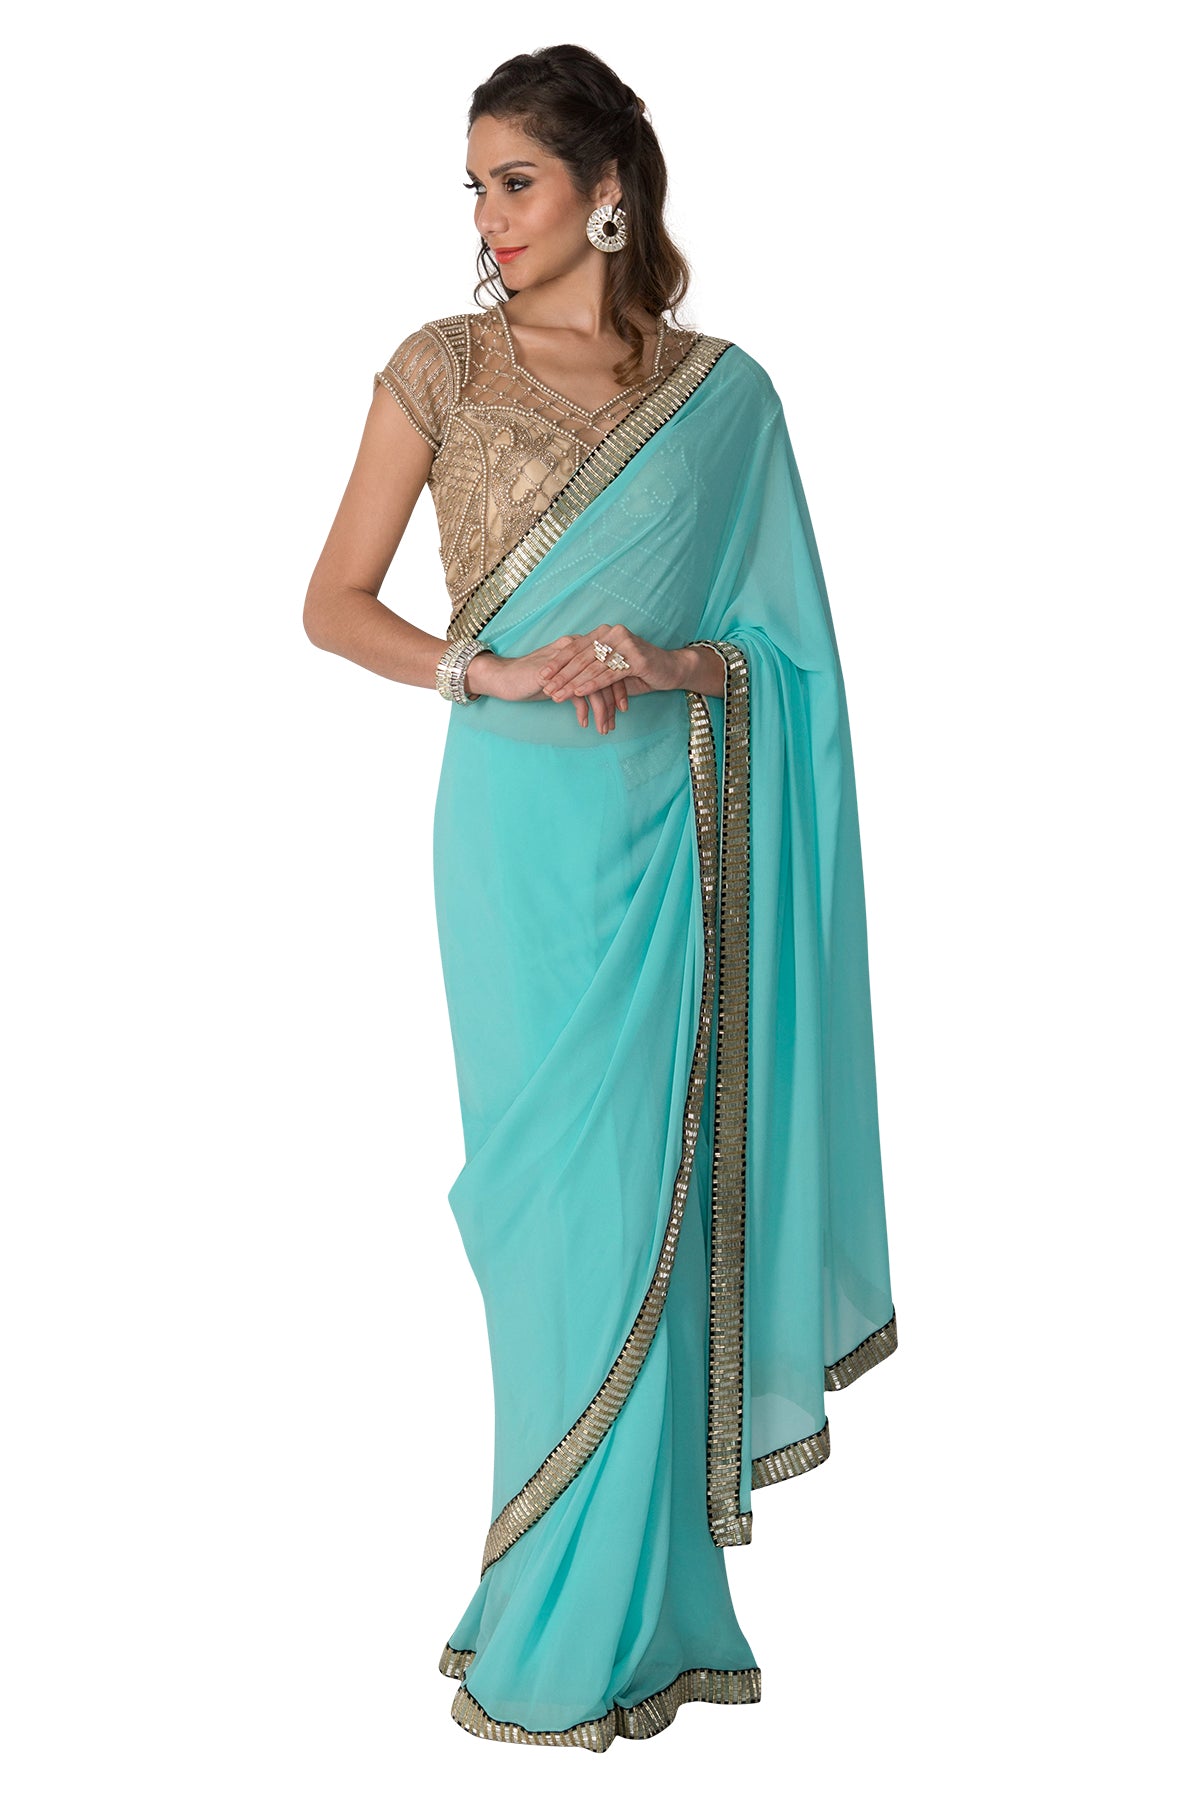 Soar into celebration-mode like a serene sight in this sky blue saree and gold blouse with delicate pearl work. Please note that the petticoat is not included.